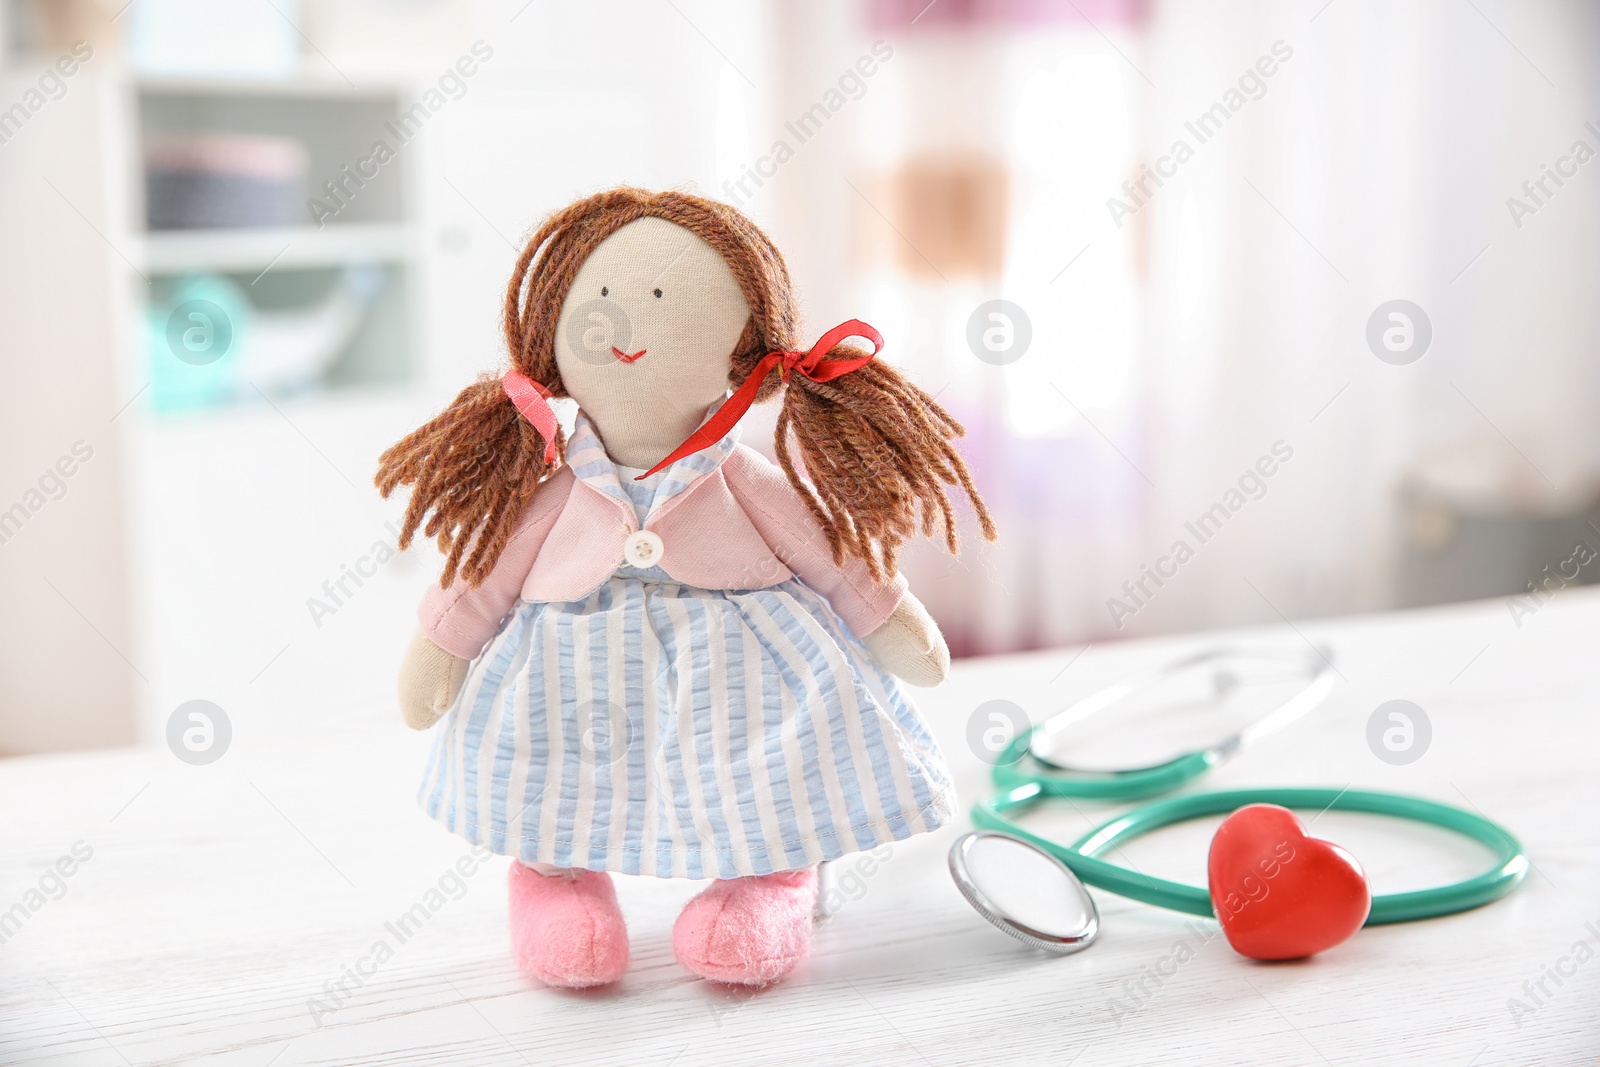 Photo of Doll, stethoscope and heart on table indoors. Children's doctor